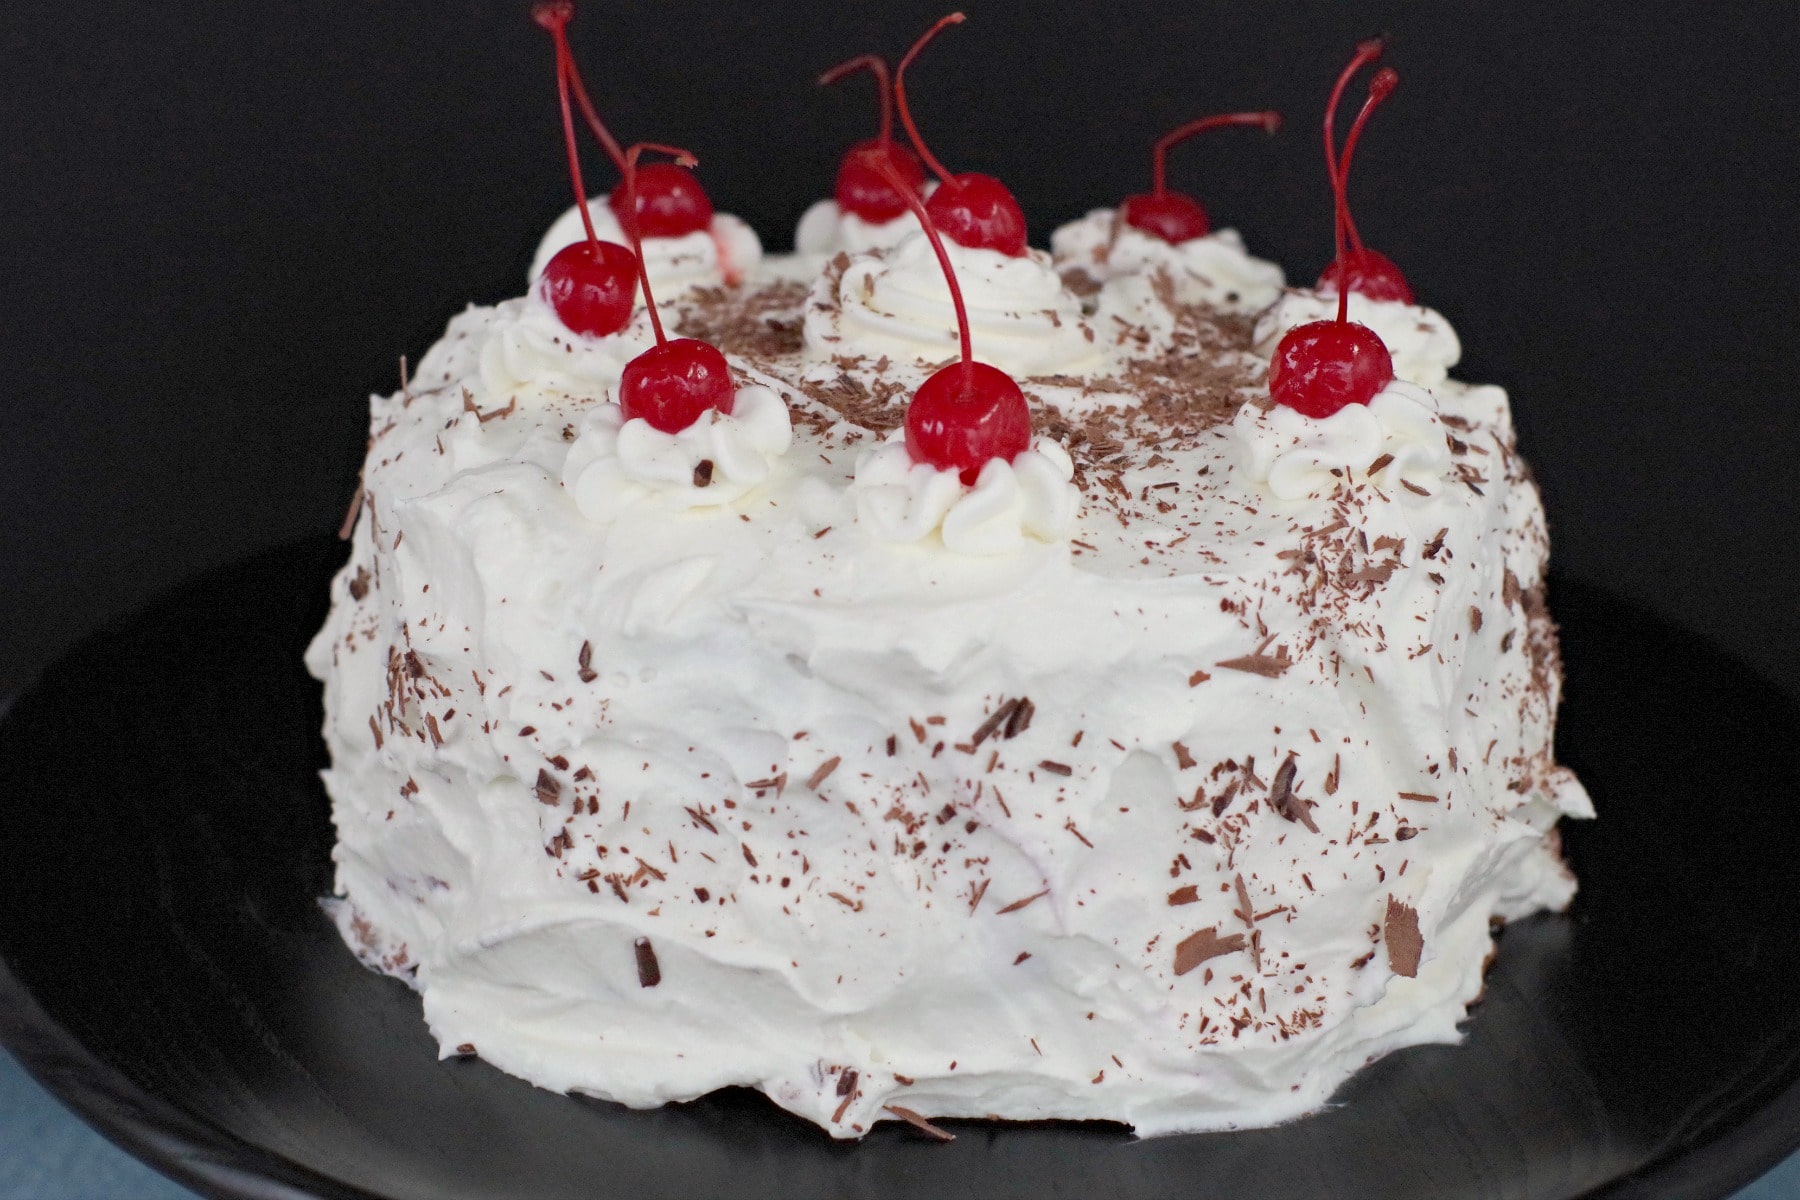 Black Forest Cake with Stabilized Whipped Cream Icing